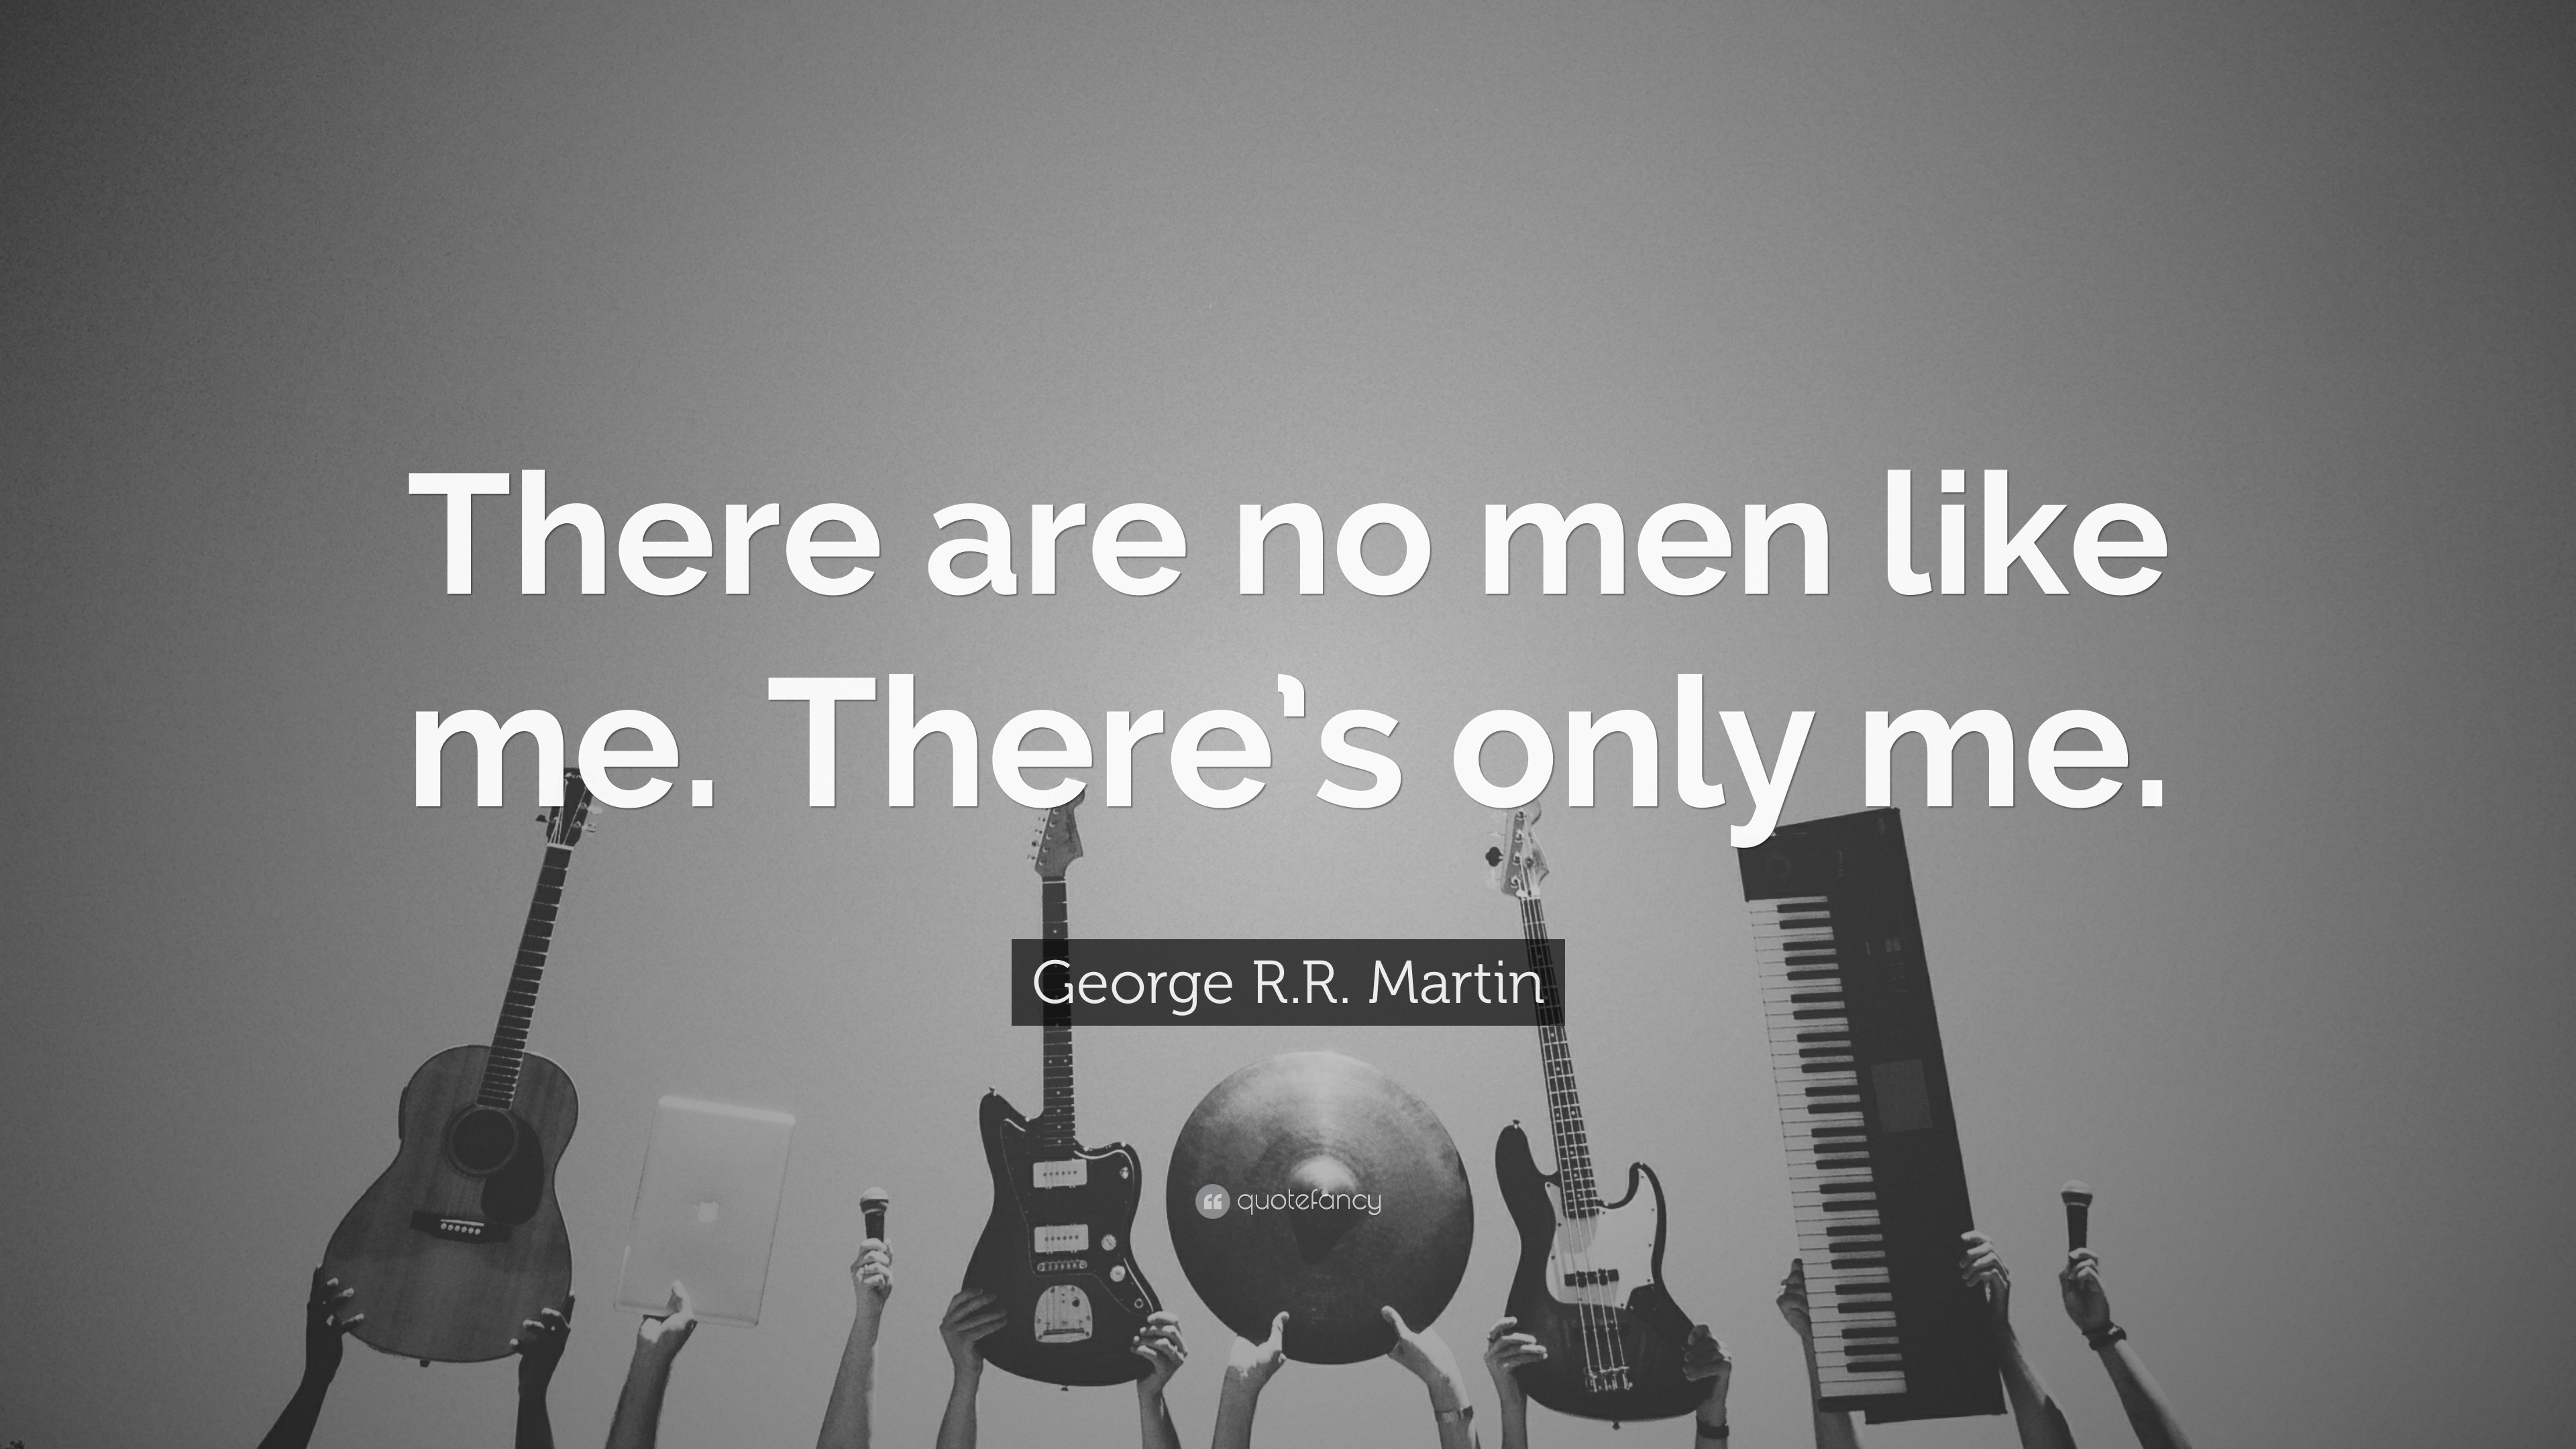 3840x2160 George R.R. Martin Quote: “There are no men like me. There's only me